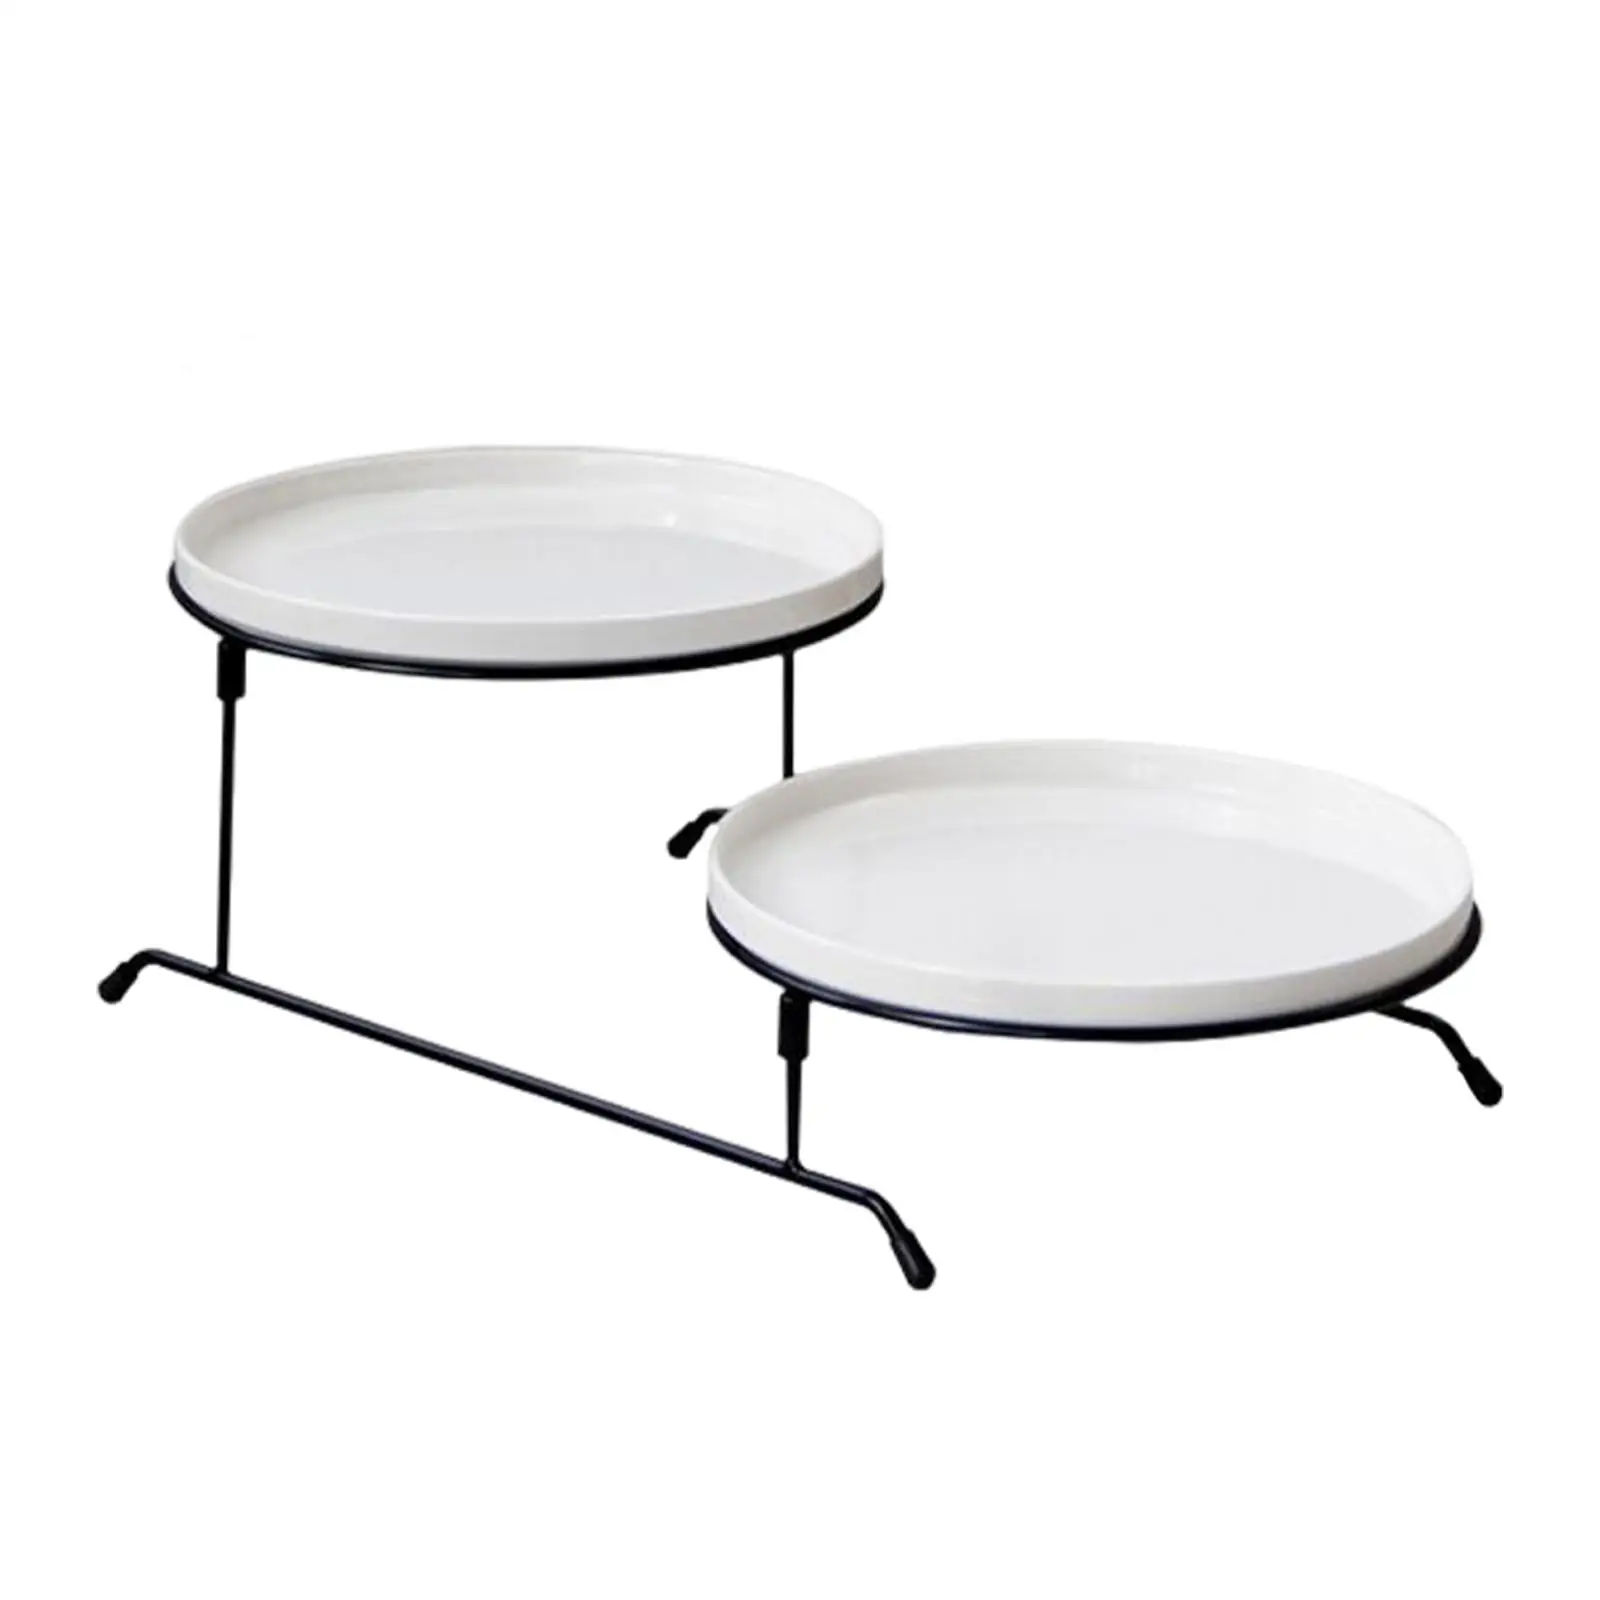 2 Tiered Serving Stand with White Ceramic Platters Dessert Display Server Mini Cake Cupcake Stand Events Hotel Buffet